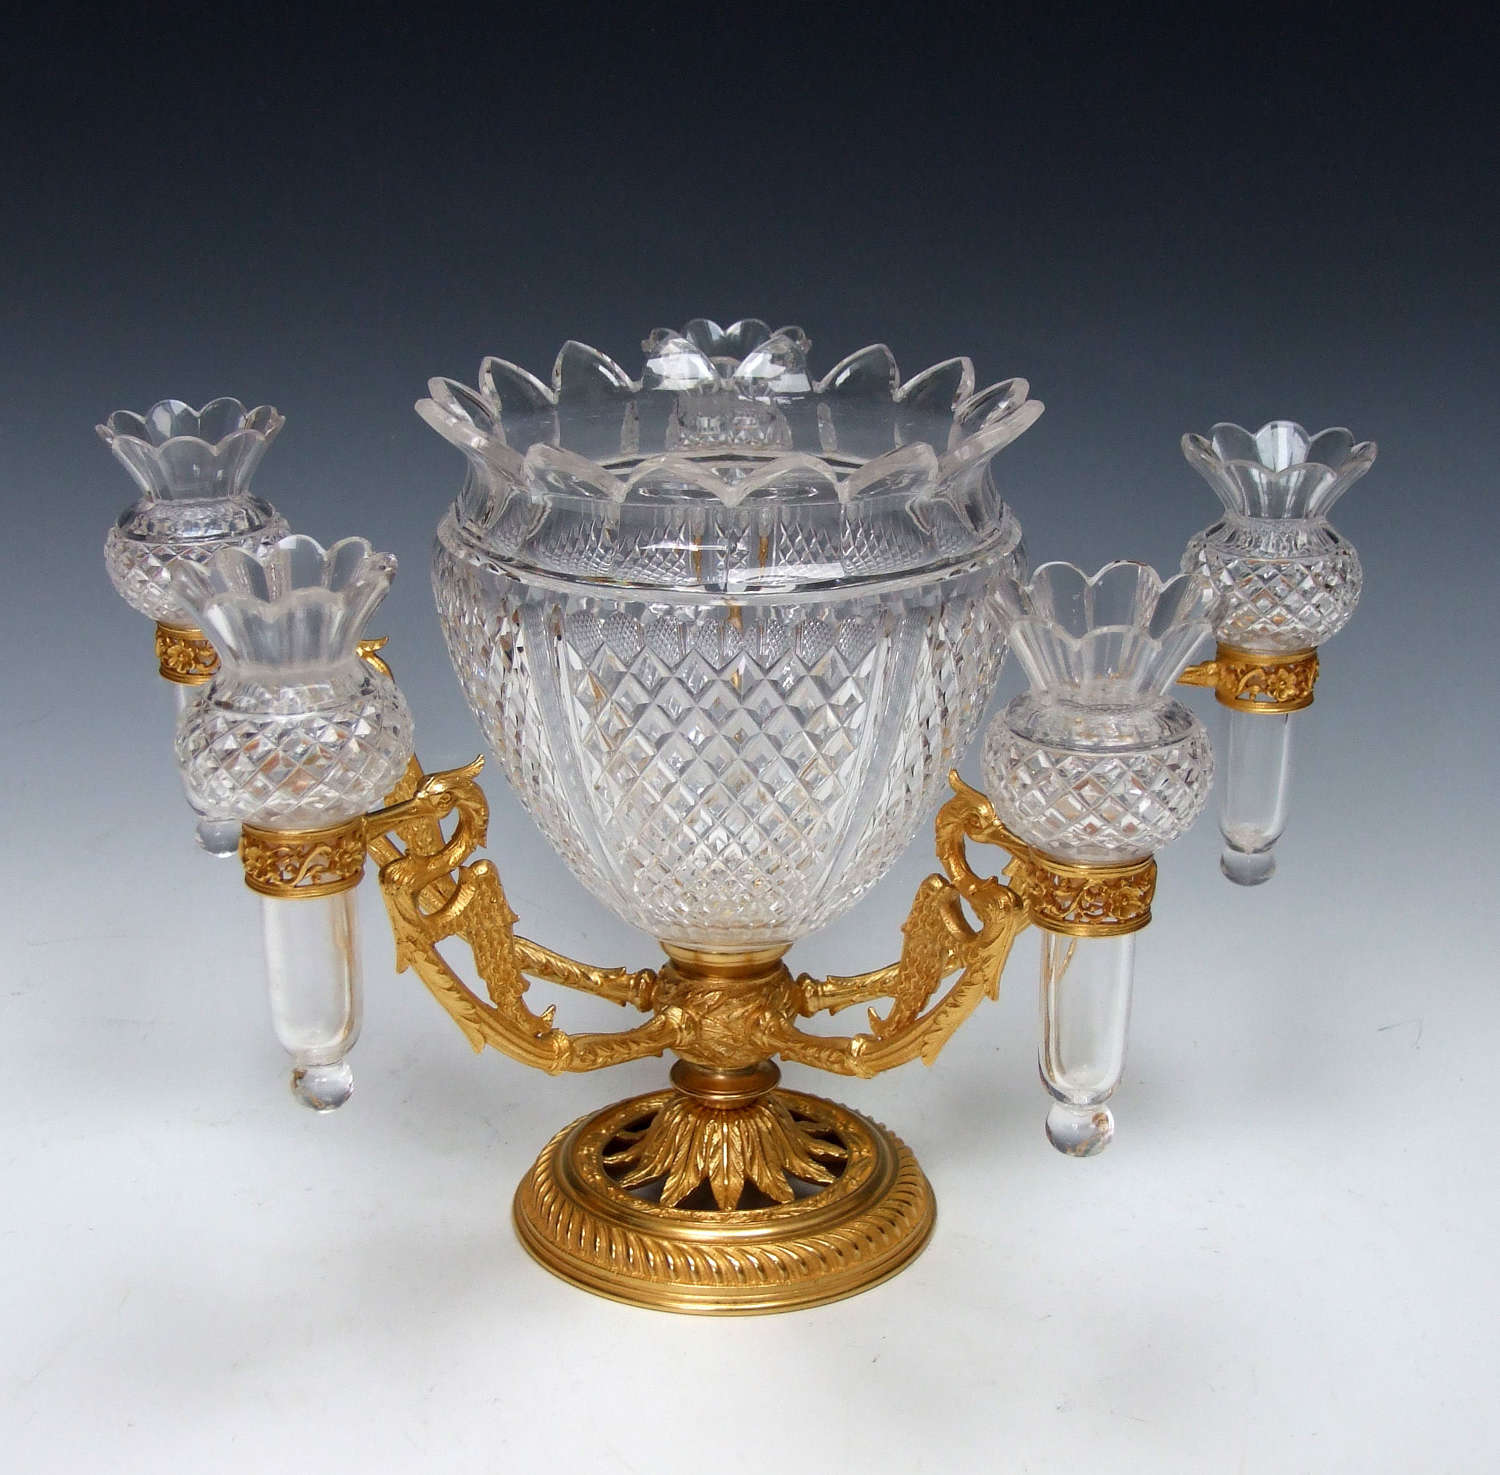 Unusual and fine quality ormolu and cut crystal epergne by F&C Osler